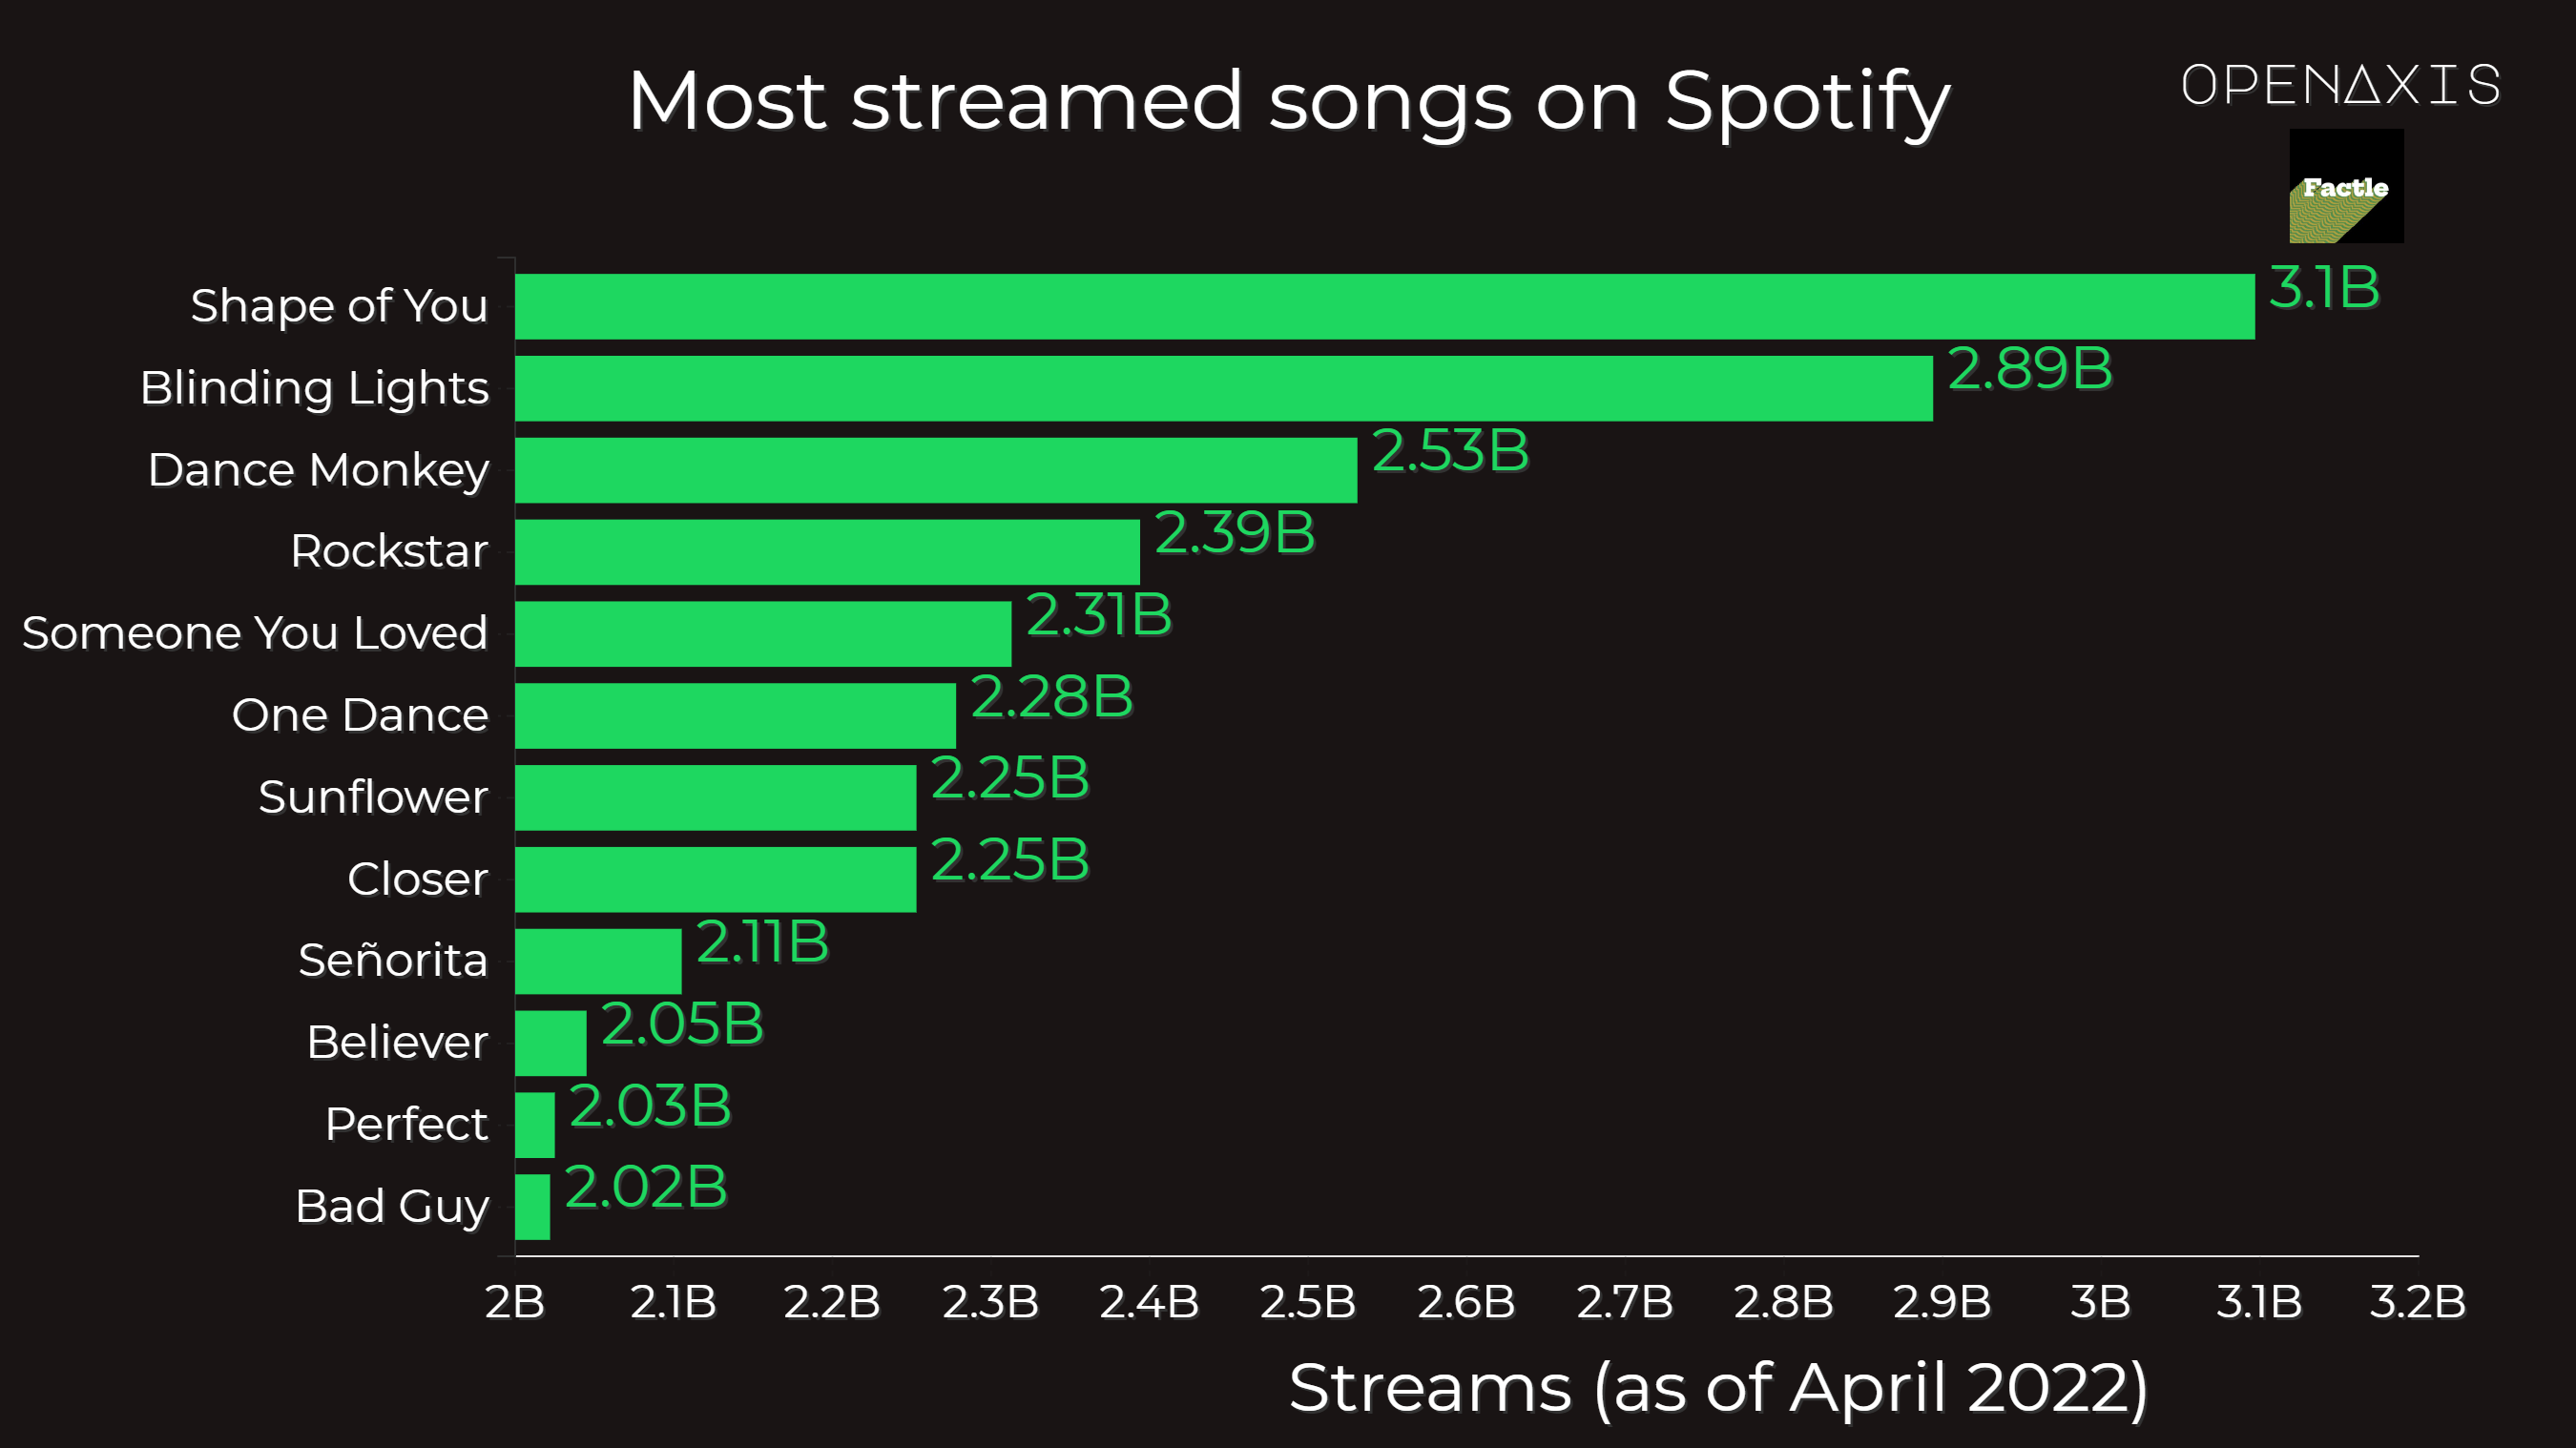 Most streamed songs on Spotify (as of April 2022) Dataset on OpenAxis